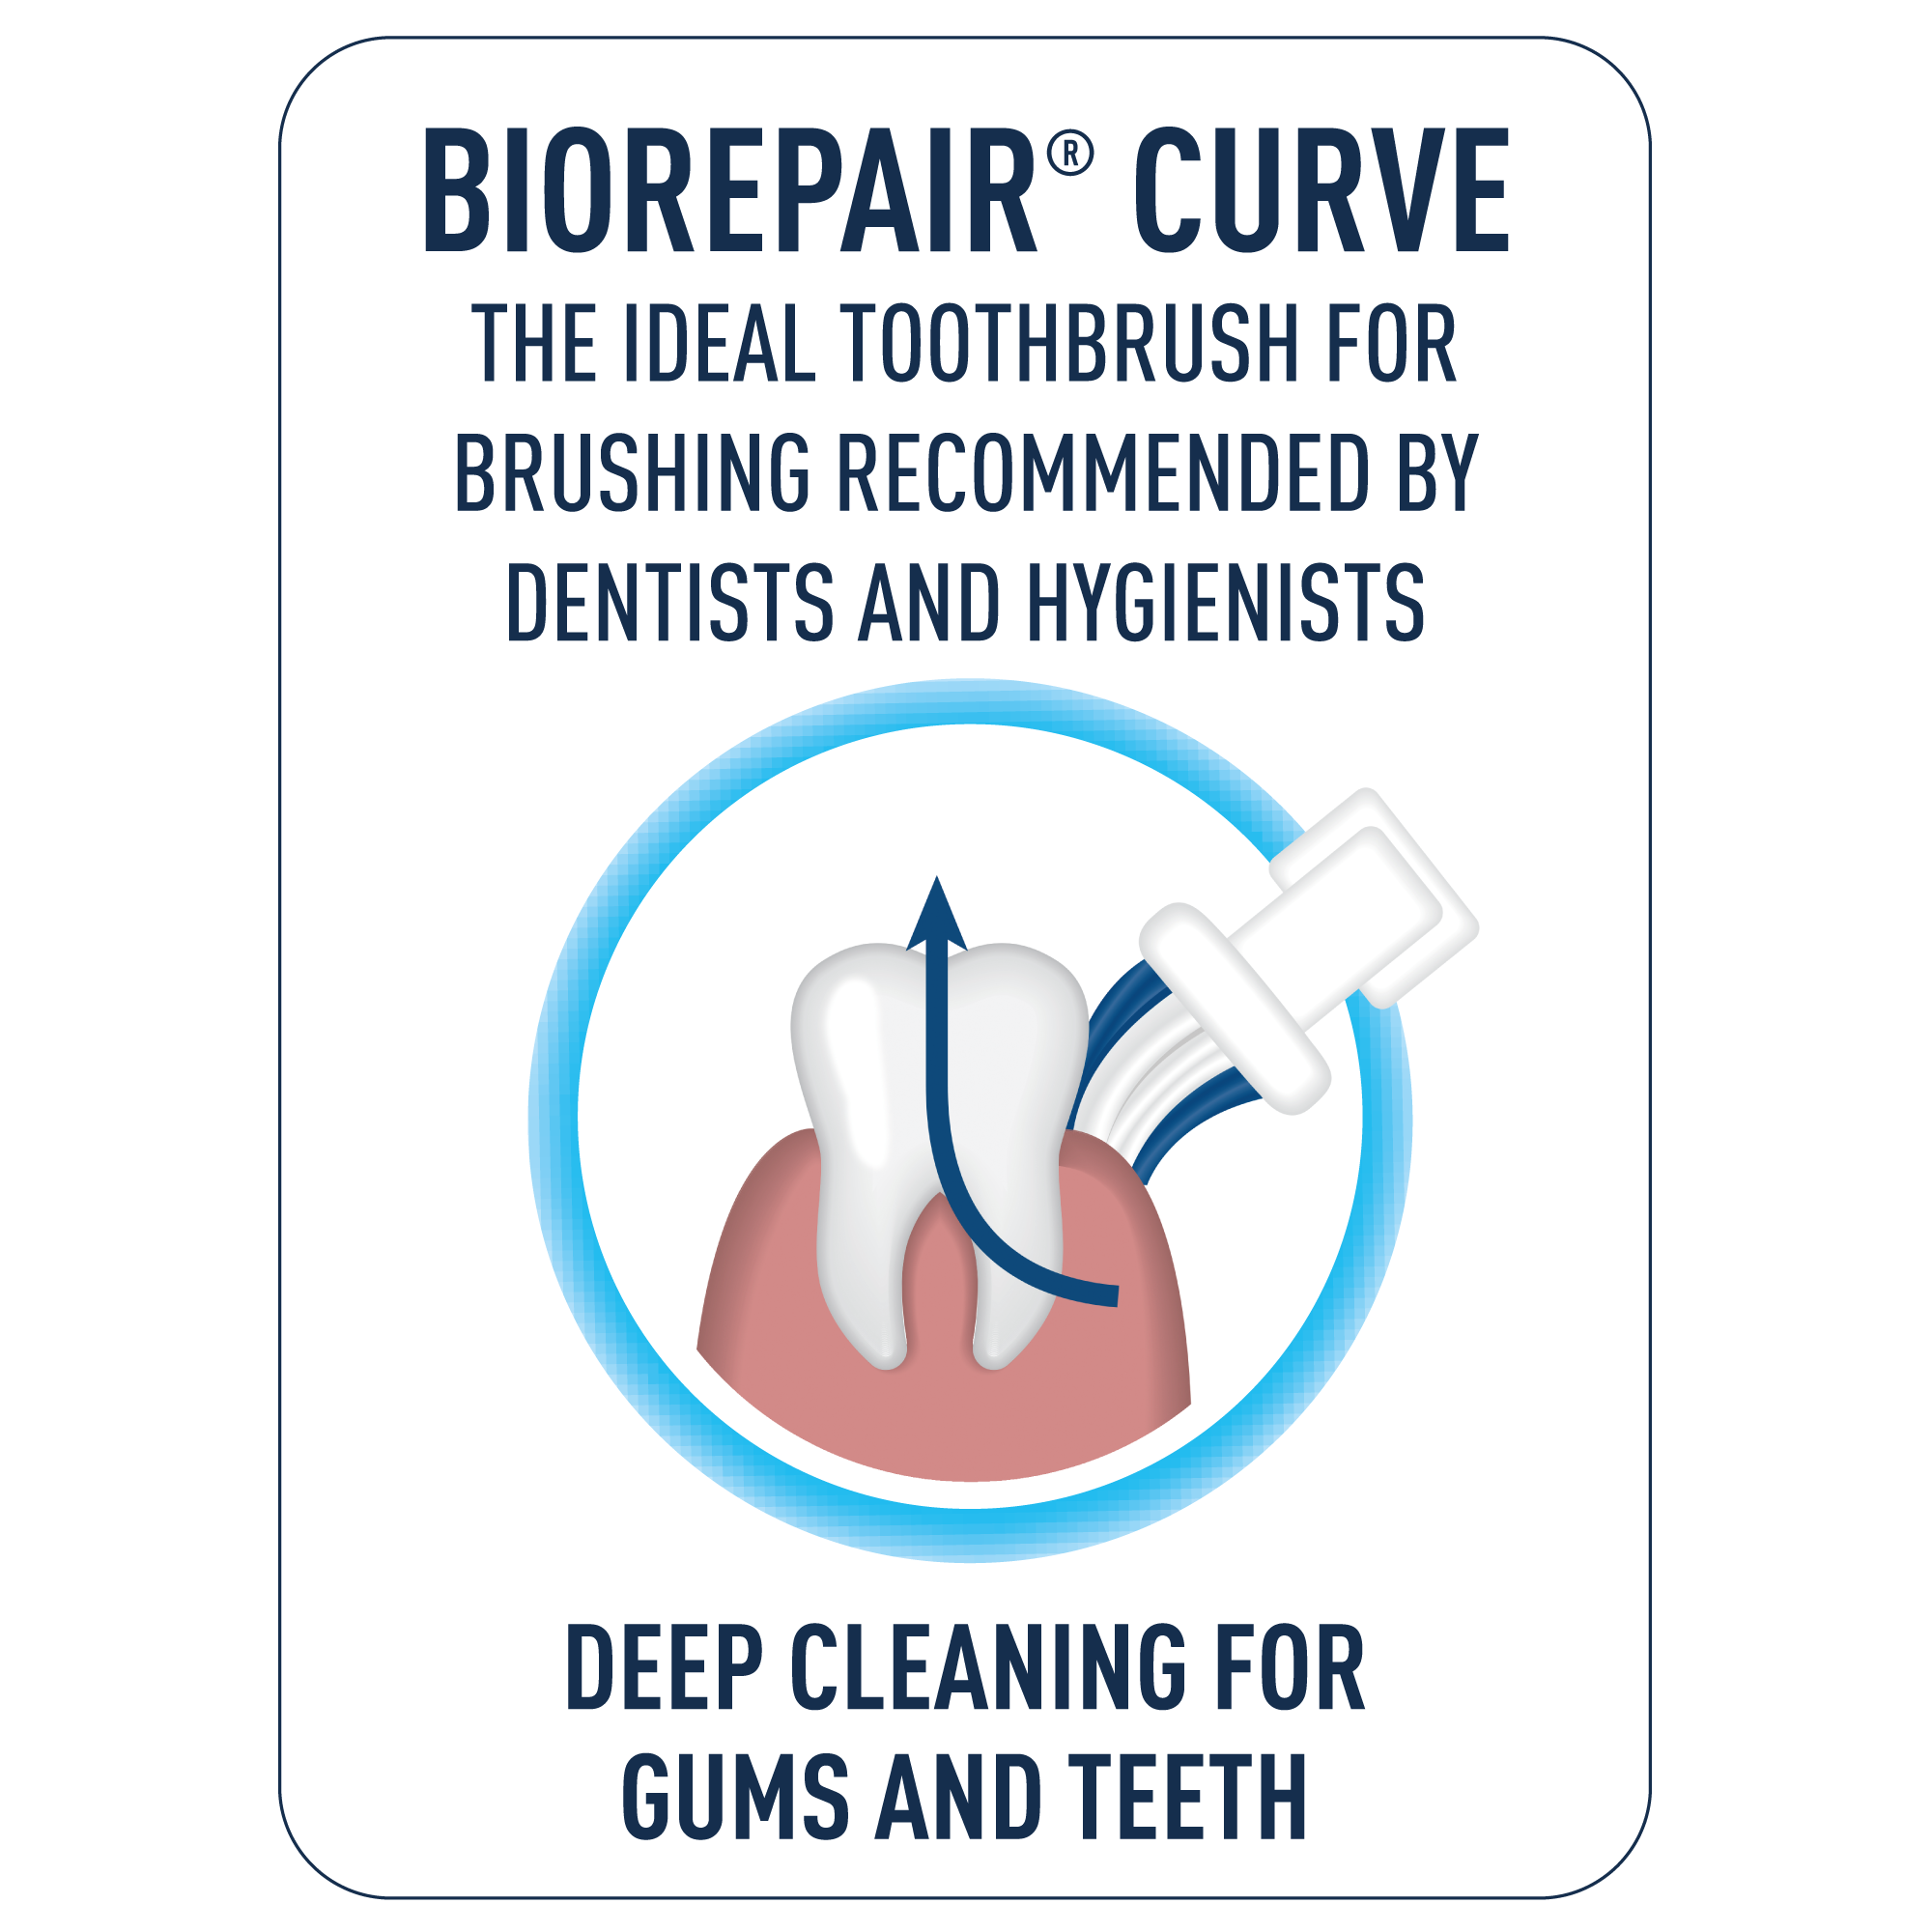 Biorepair CURVE for the deep cleaning of teeth and gums